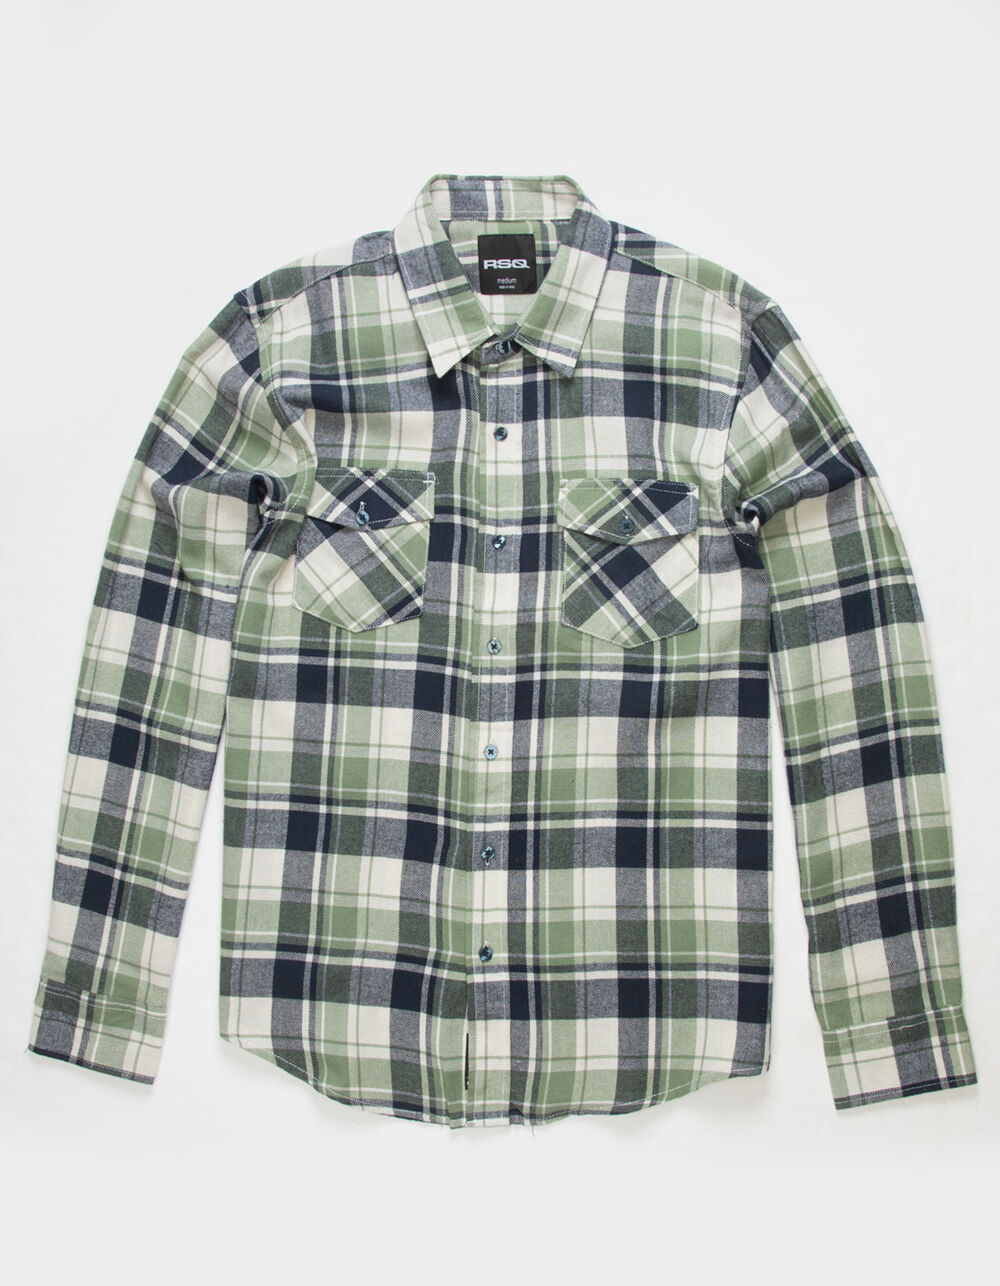 RSQ Mens Plaid Flannel - NAVY COMBO | Tillys